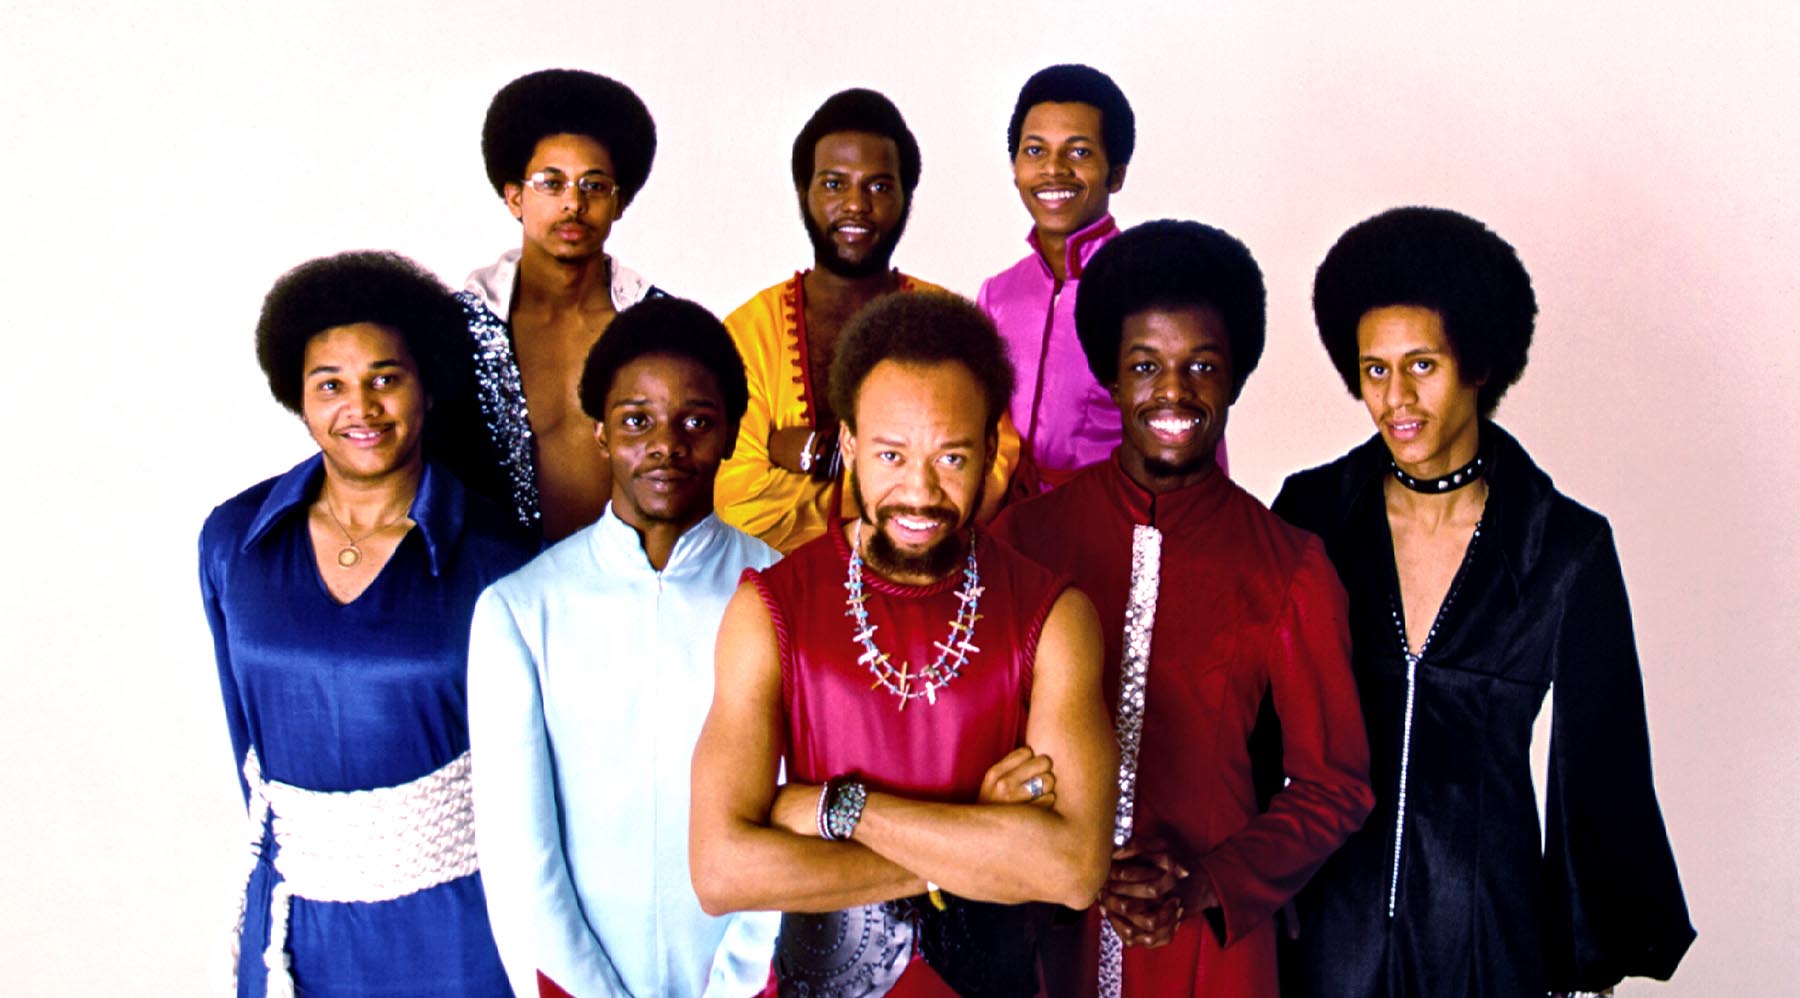 Earth Wind & Fire Photo by Michael Ochs Archives/Getty Images